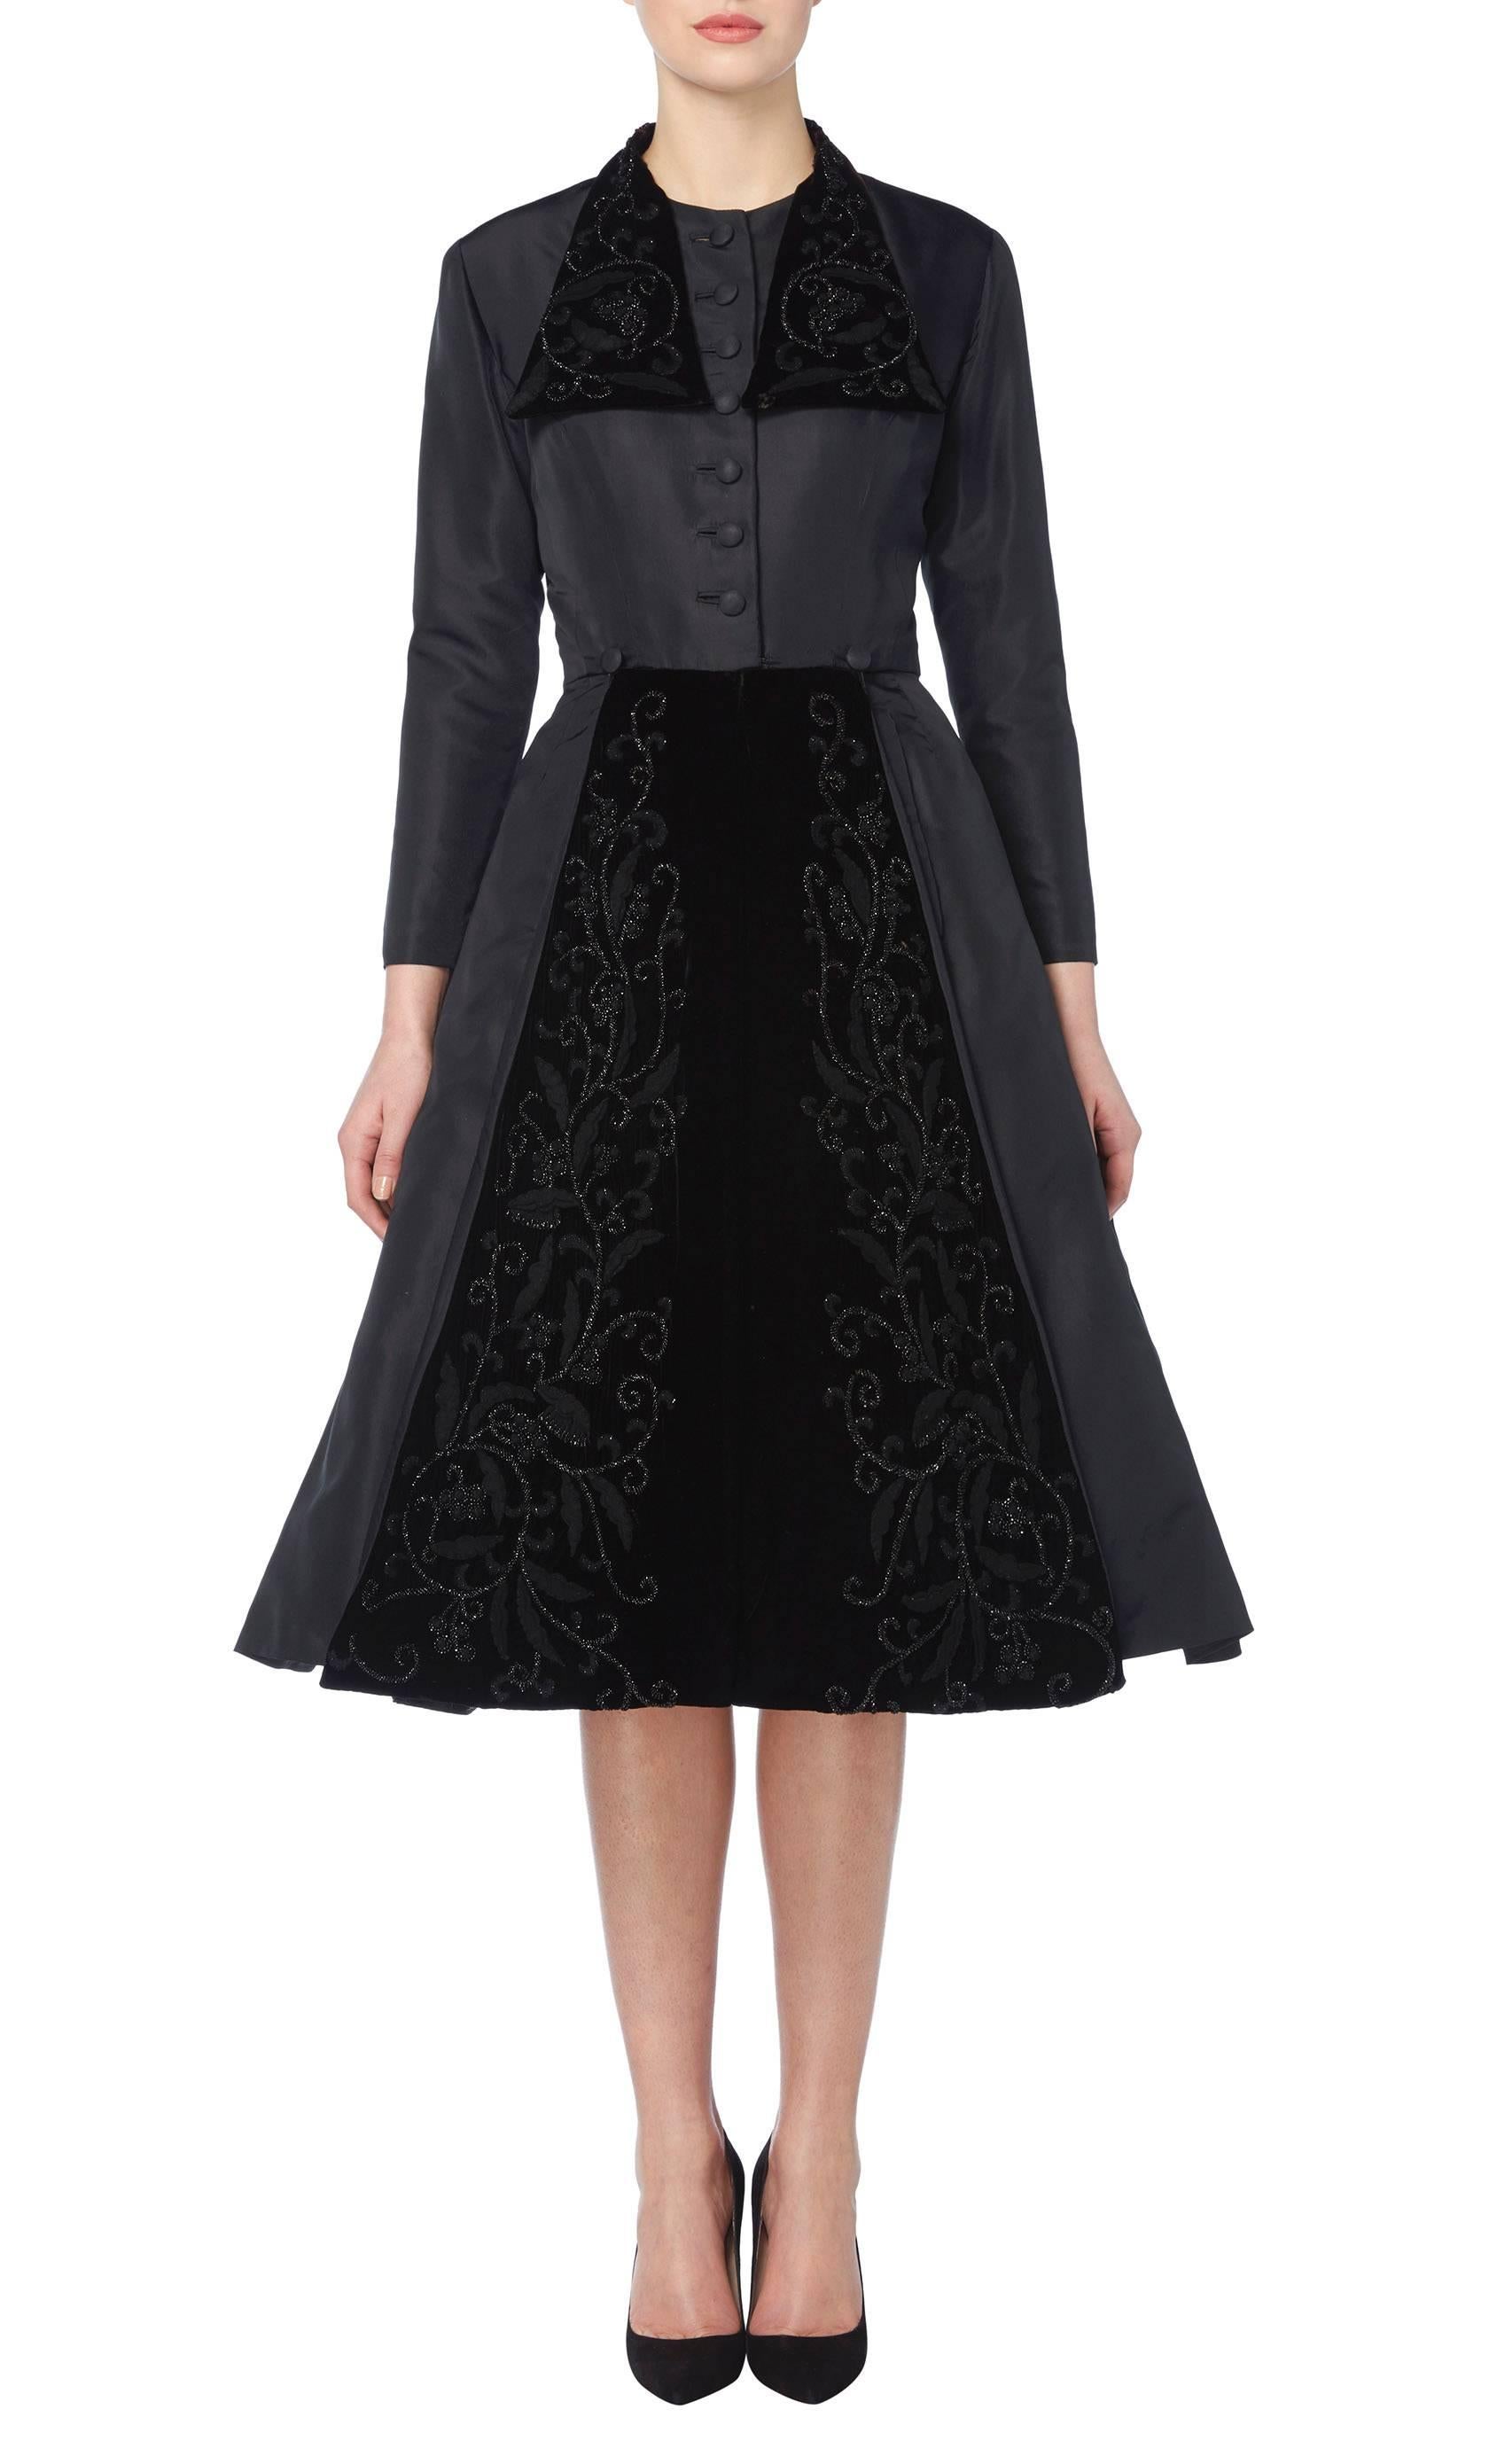 An incredible example of Dior's 'New Look', this dress coat is cut in the famous Dior silhouette, with a nipped in waist and wide skirt. The dress coat is constructed from black silk taffeta with panels of black velvet embroidery on the front of the